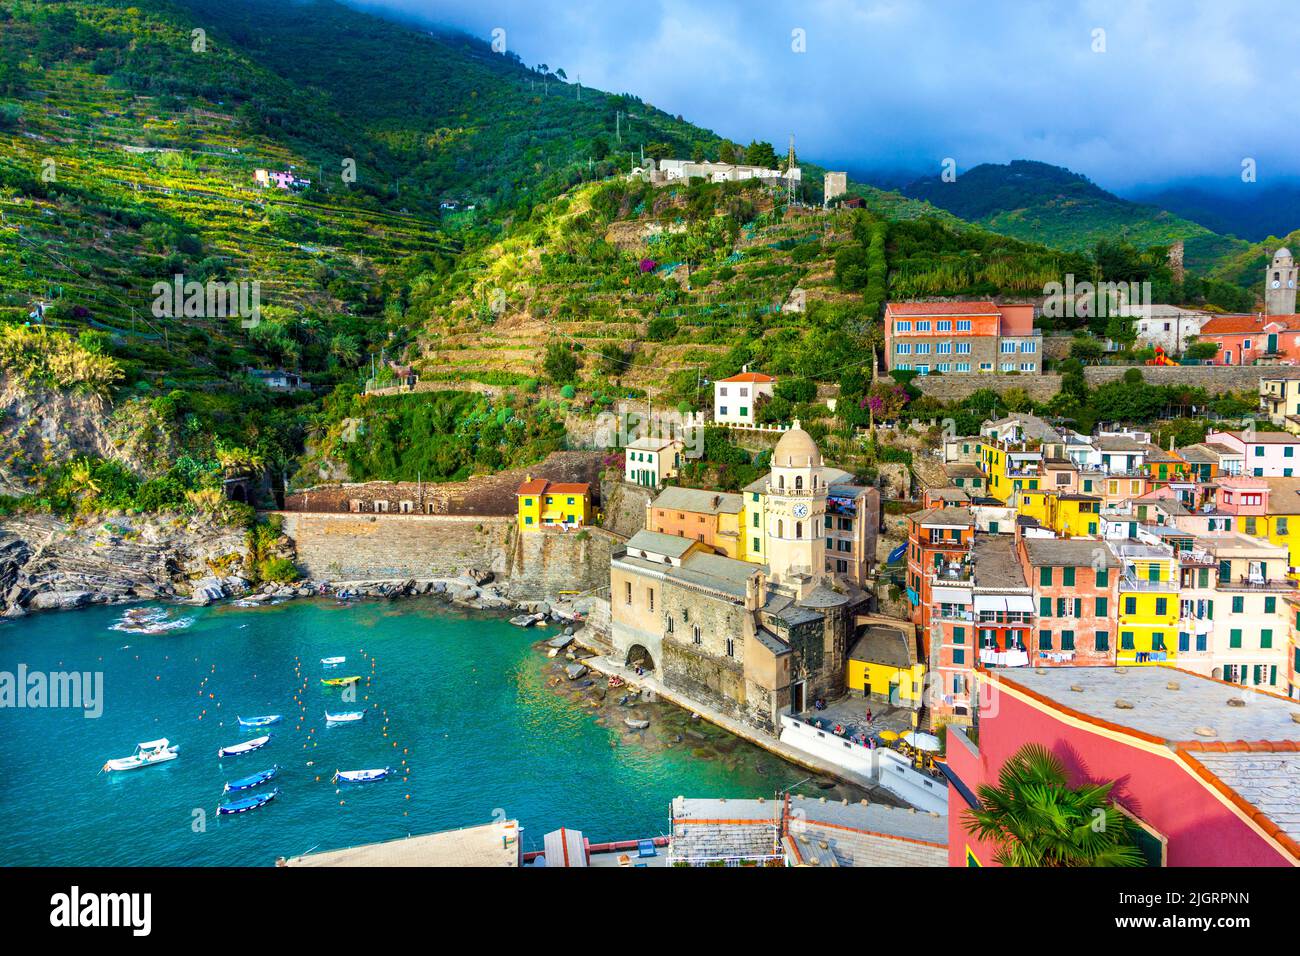 View of colourful houses and terraces in Vernazza, Cinque Terre, La Spezia, Italy Stock Photo